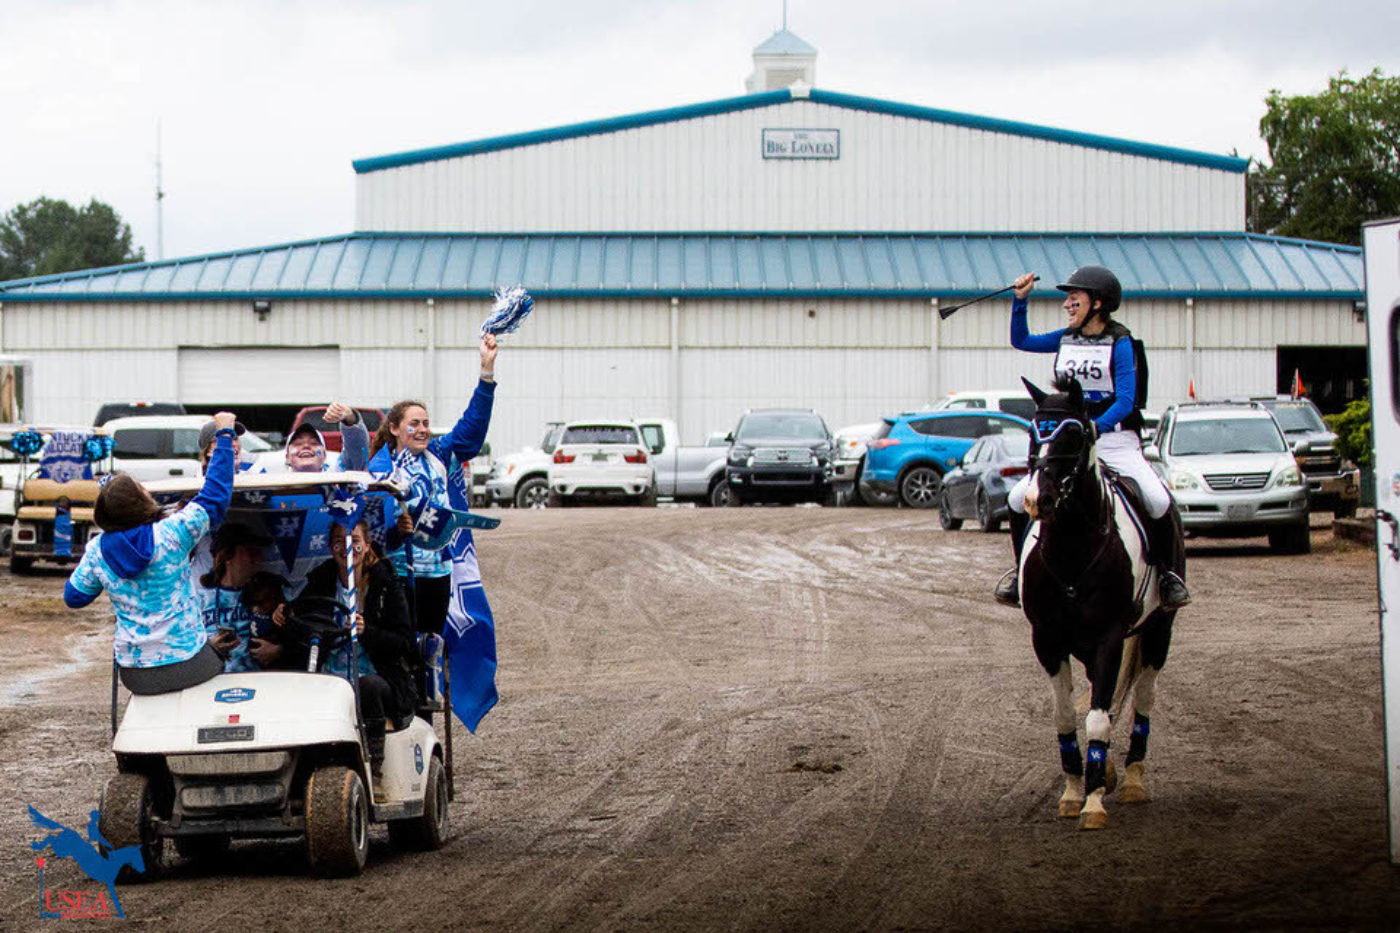 Kentucky cheering their teammate on prior to cross-country. USEA/Kim Beaudoin Photo